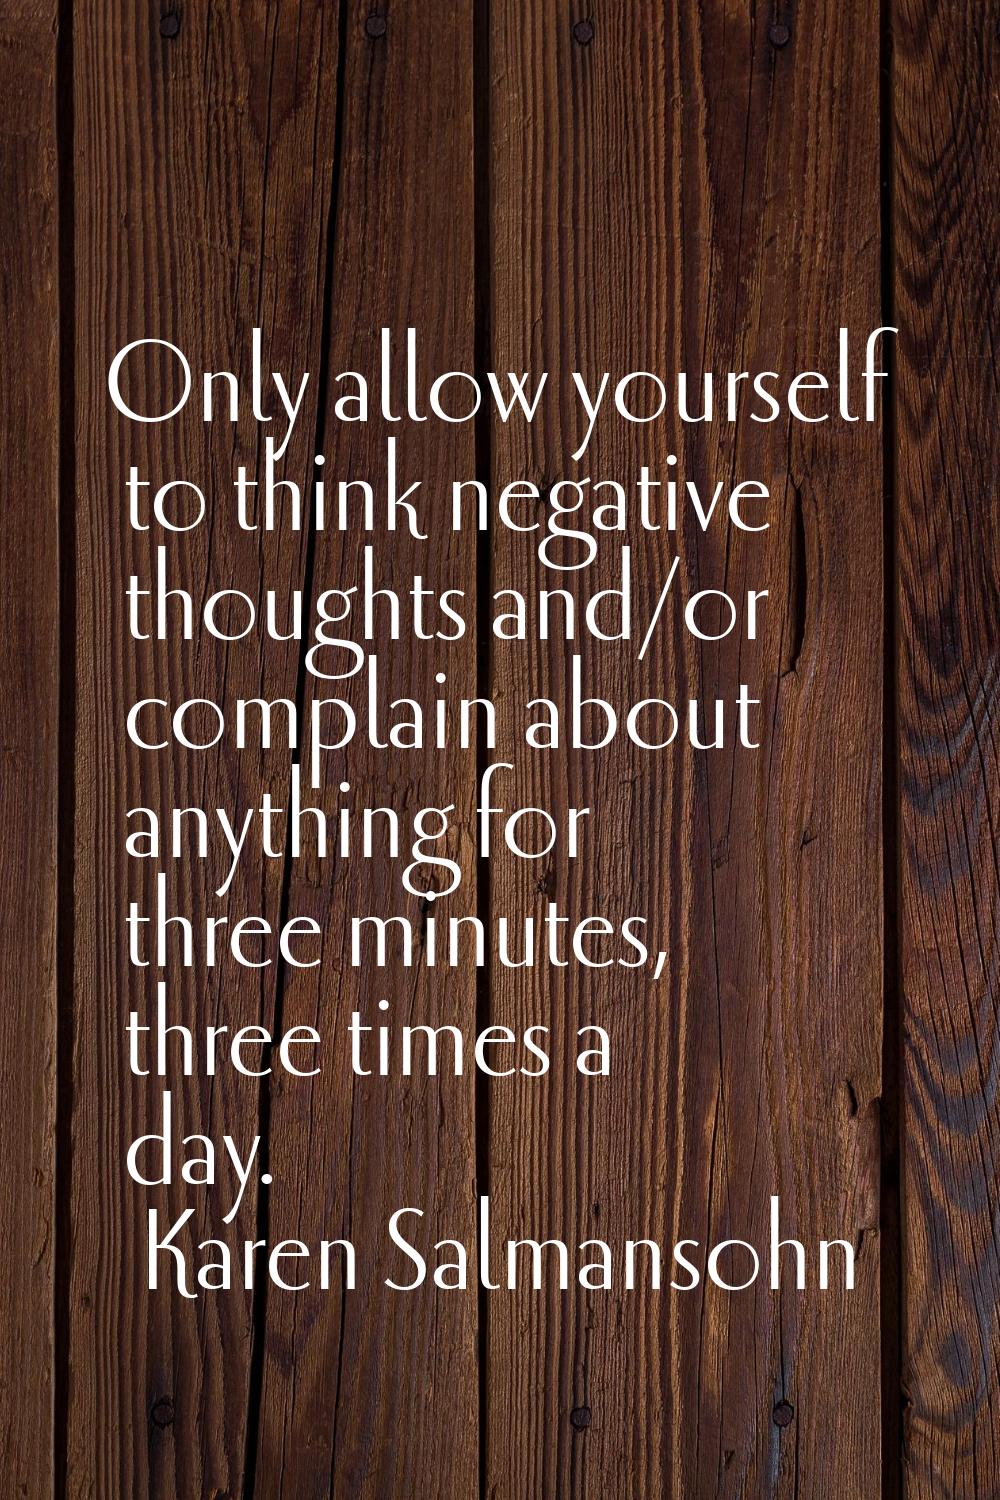 Only allow yourself to think negative thoughts and/or complain about anything for three minutes, th